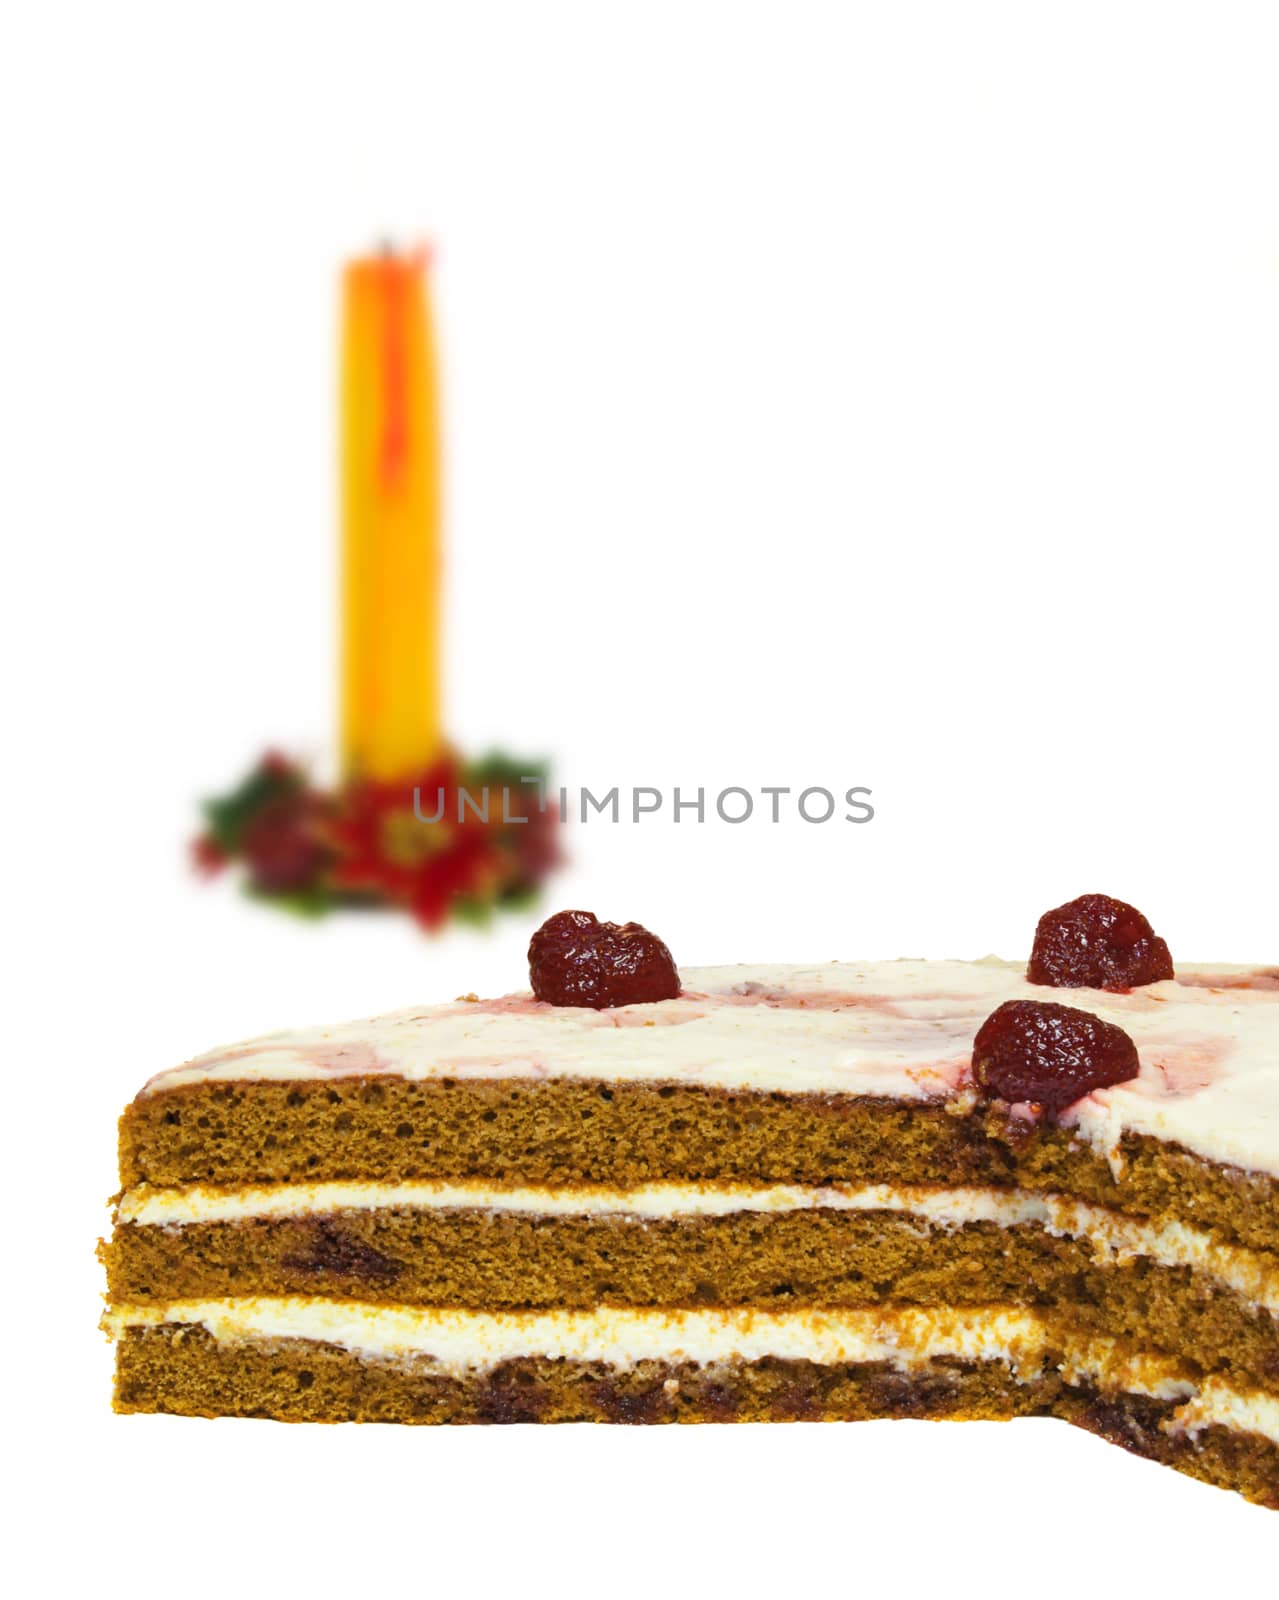 On a white background is clearly visible sponge layer cake. In the background, candle wax